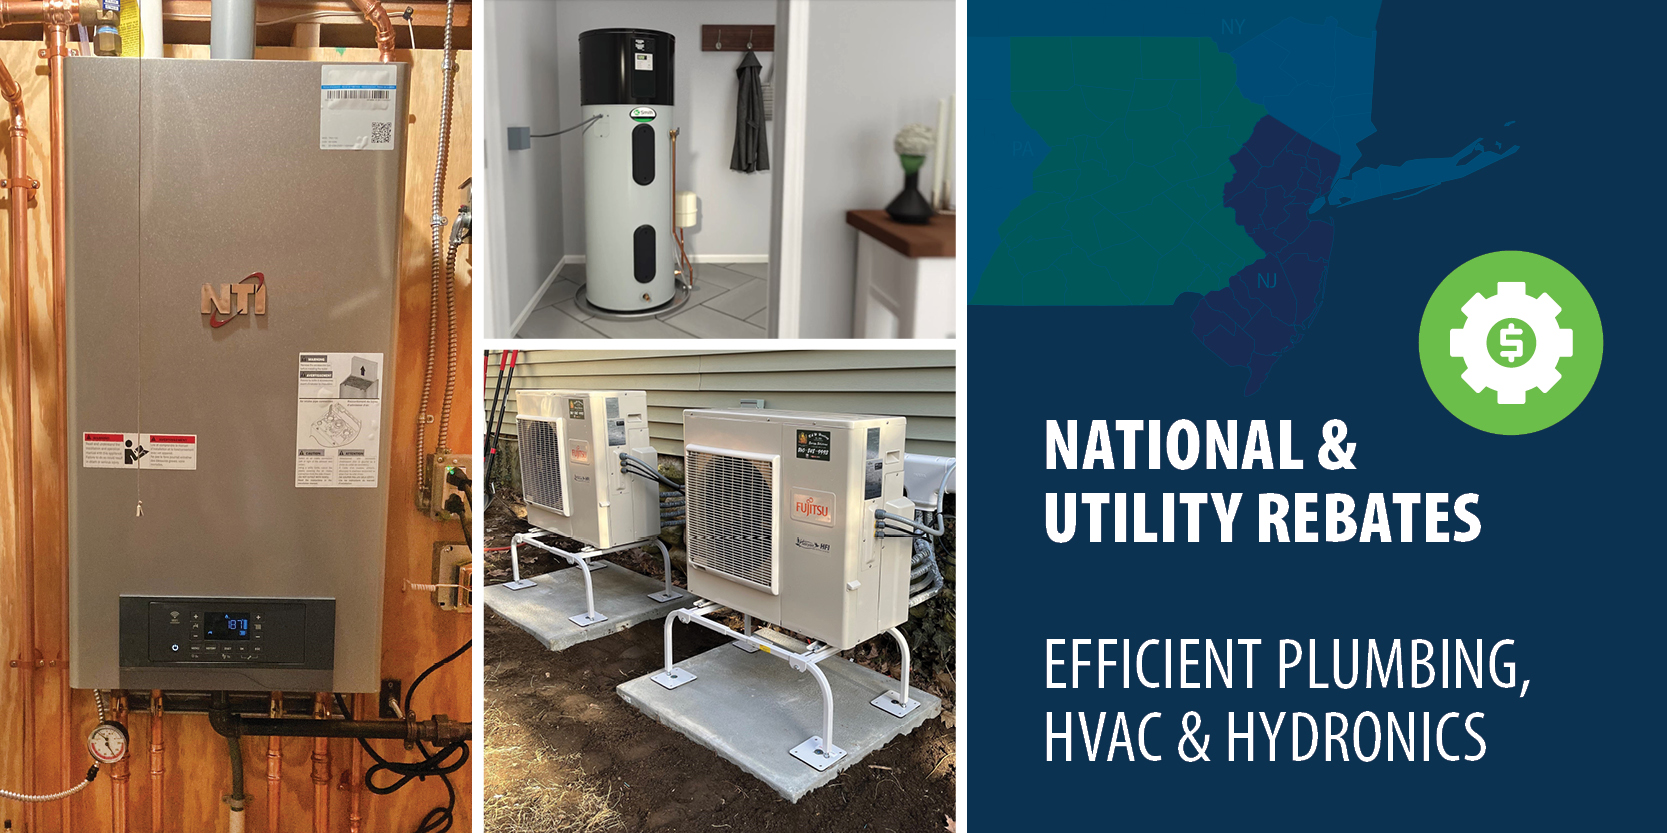 utility-rebates-national-discounts-heating-cooling-hot-water-wales-darby